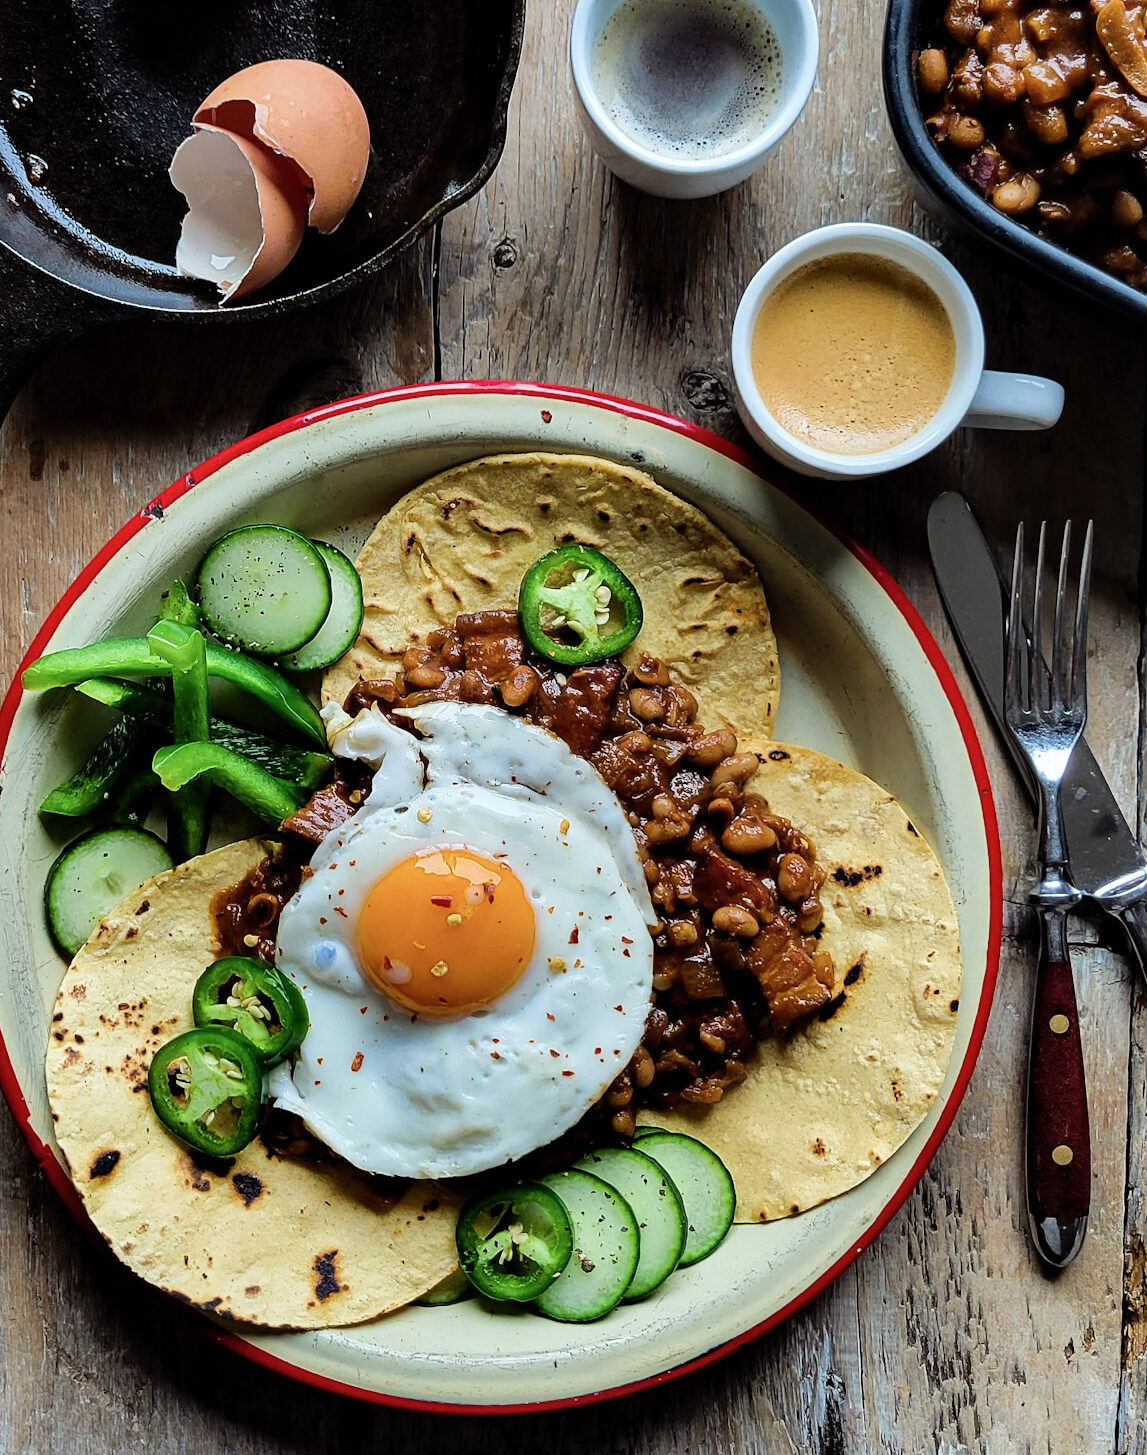 A plate with tortillas, baked beans,and an egg for breakfast, with coffee, a skillet with egg shells and more baked beans are to the side.